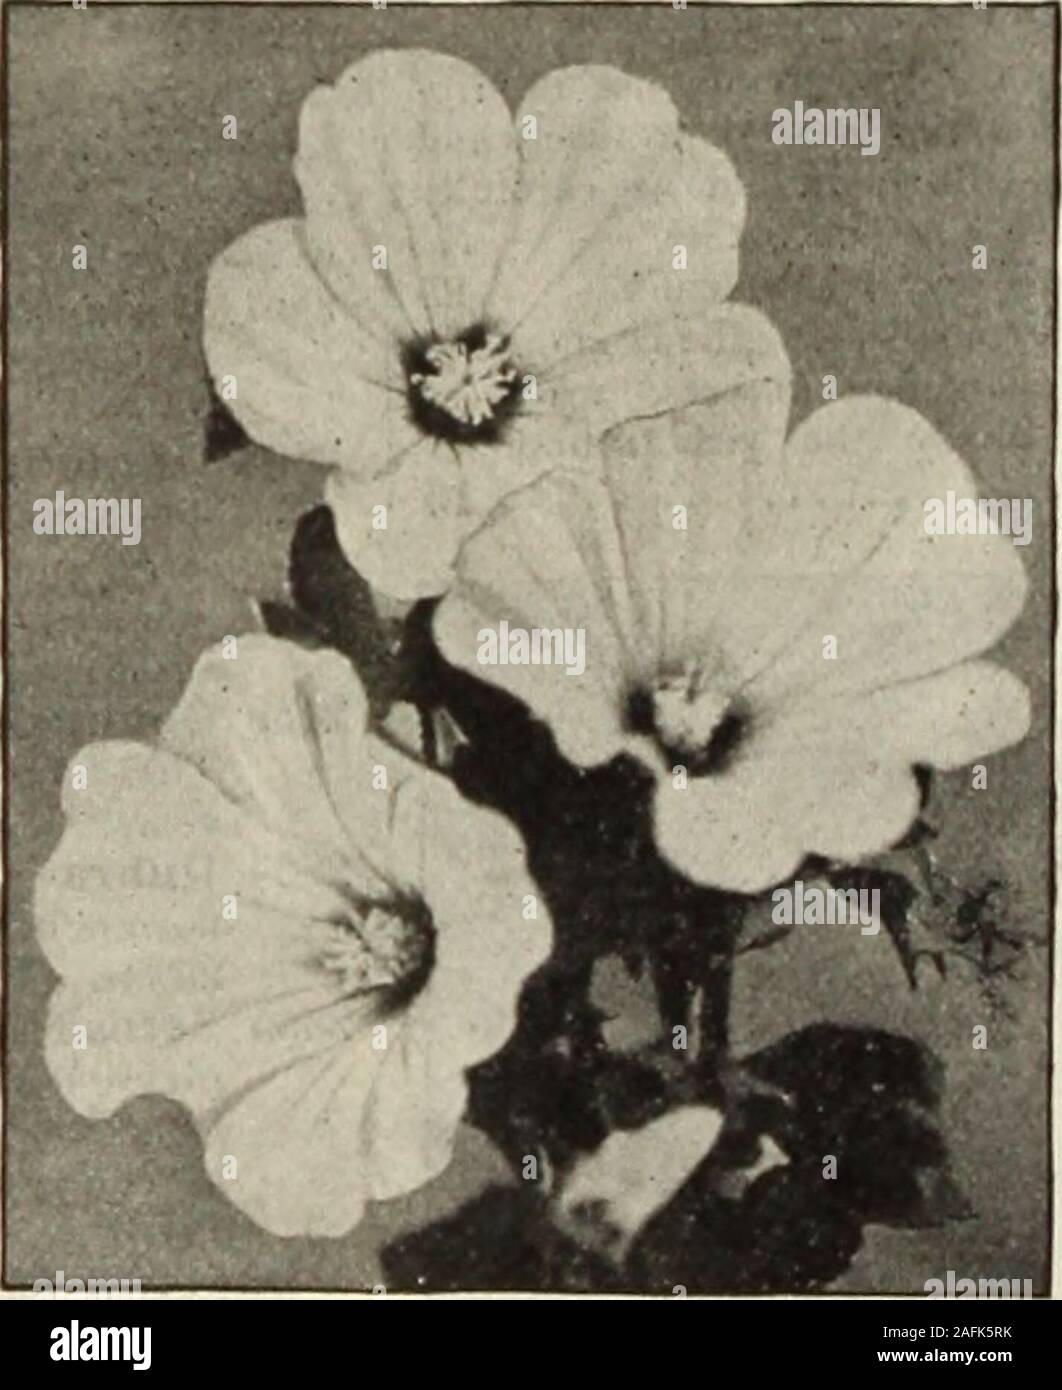 . Dreer's garden book 1915. Lavatera. KoCHIA. I.ATHYRUS. (Everlasting, or Hardy SweetPea.) Showy, free-flowering hardyperennial climbers for coveringold slumps, fences, etc., con-tinually in bloom; fine for cut-ting. PER PKT. 2954 Latifollus WhitePearl. The finest while variety 15 2955 — Pink Beauty. Rosy pink .... 10 2960 — Mixed. All colors. Per oz., 40 cts 5 I. A VENDER. (Lavandula Vera.) 2971 ^^V11 known, sweet-scented, haidy peren-nials; should be exten-sively grown in themixed bonier; 3 feet.^ oz., 25 cts 10 ANNUAE EARKSPITRS. This is one of the best known of garden flowers, and in recen Stock Photo